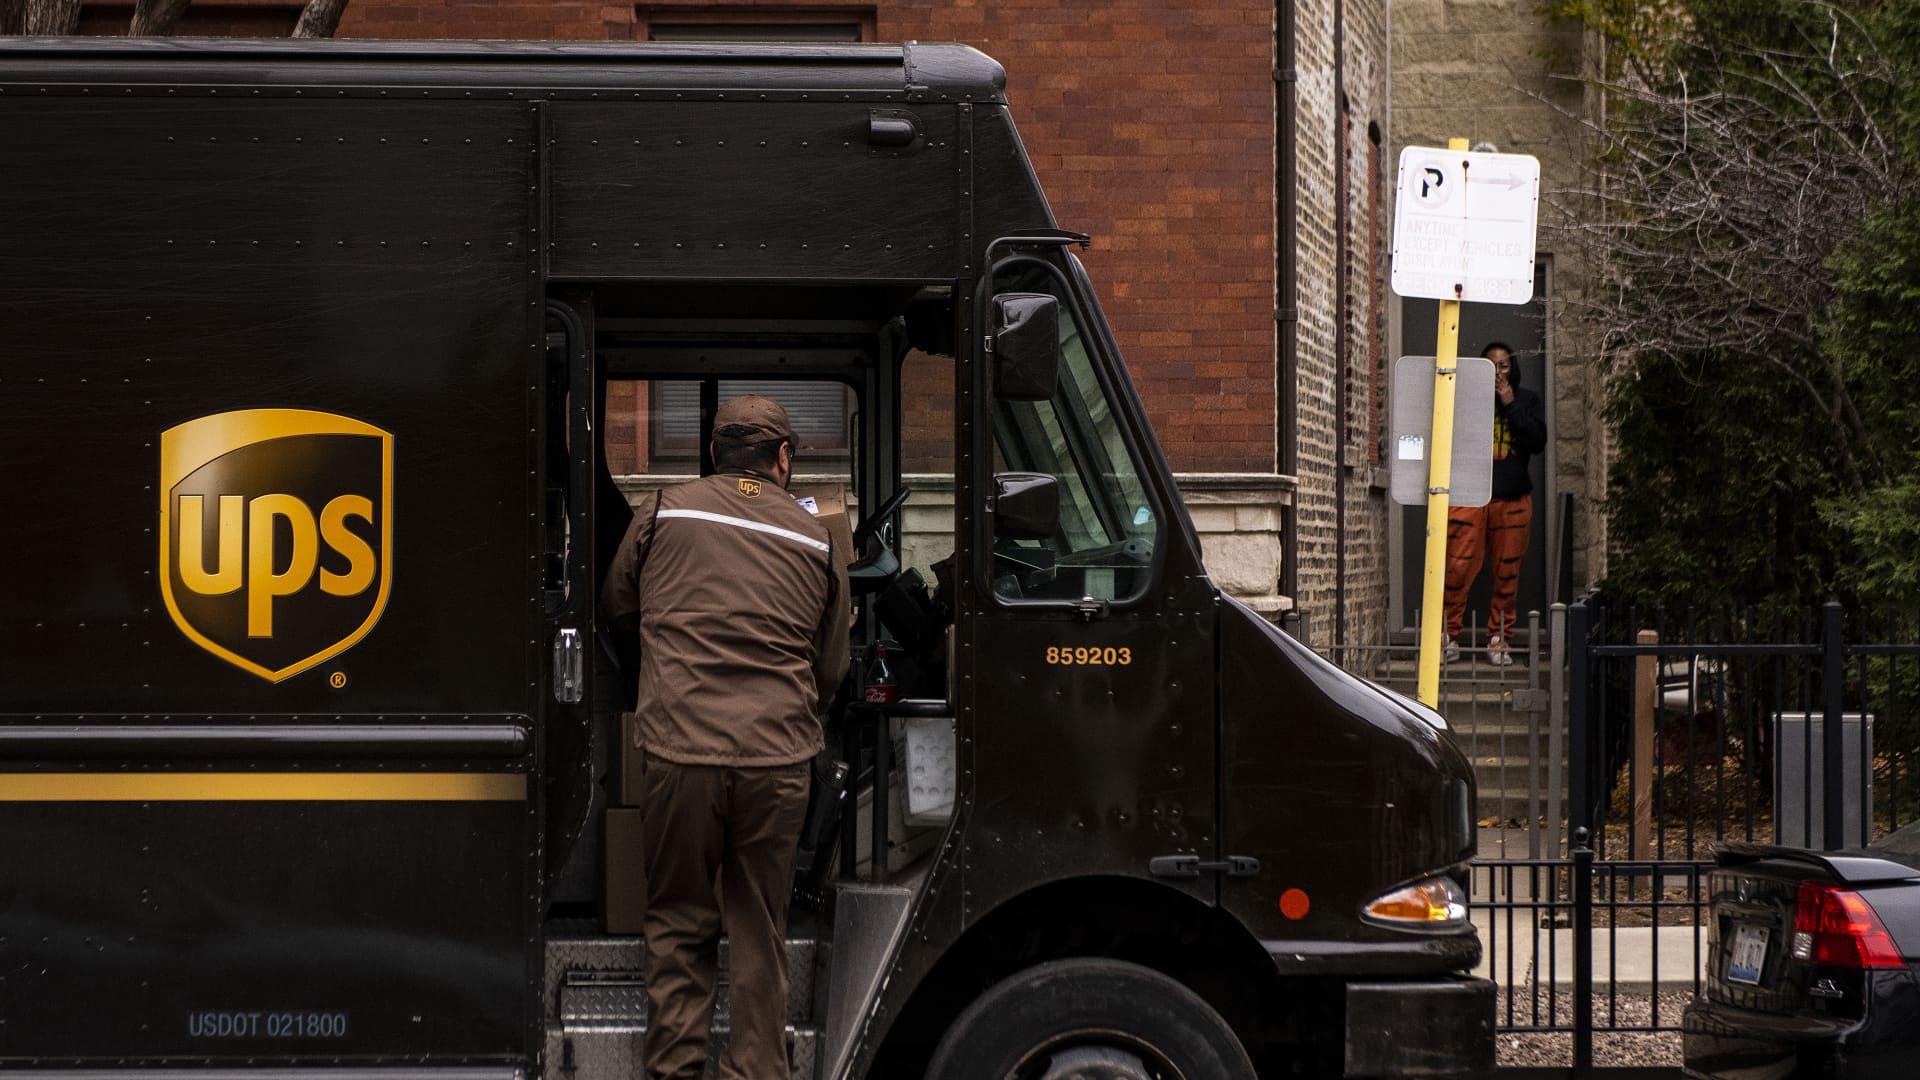 Buy UPS as the stock is cheap and offers one of the highest dividend yields, Loop says